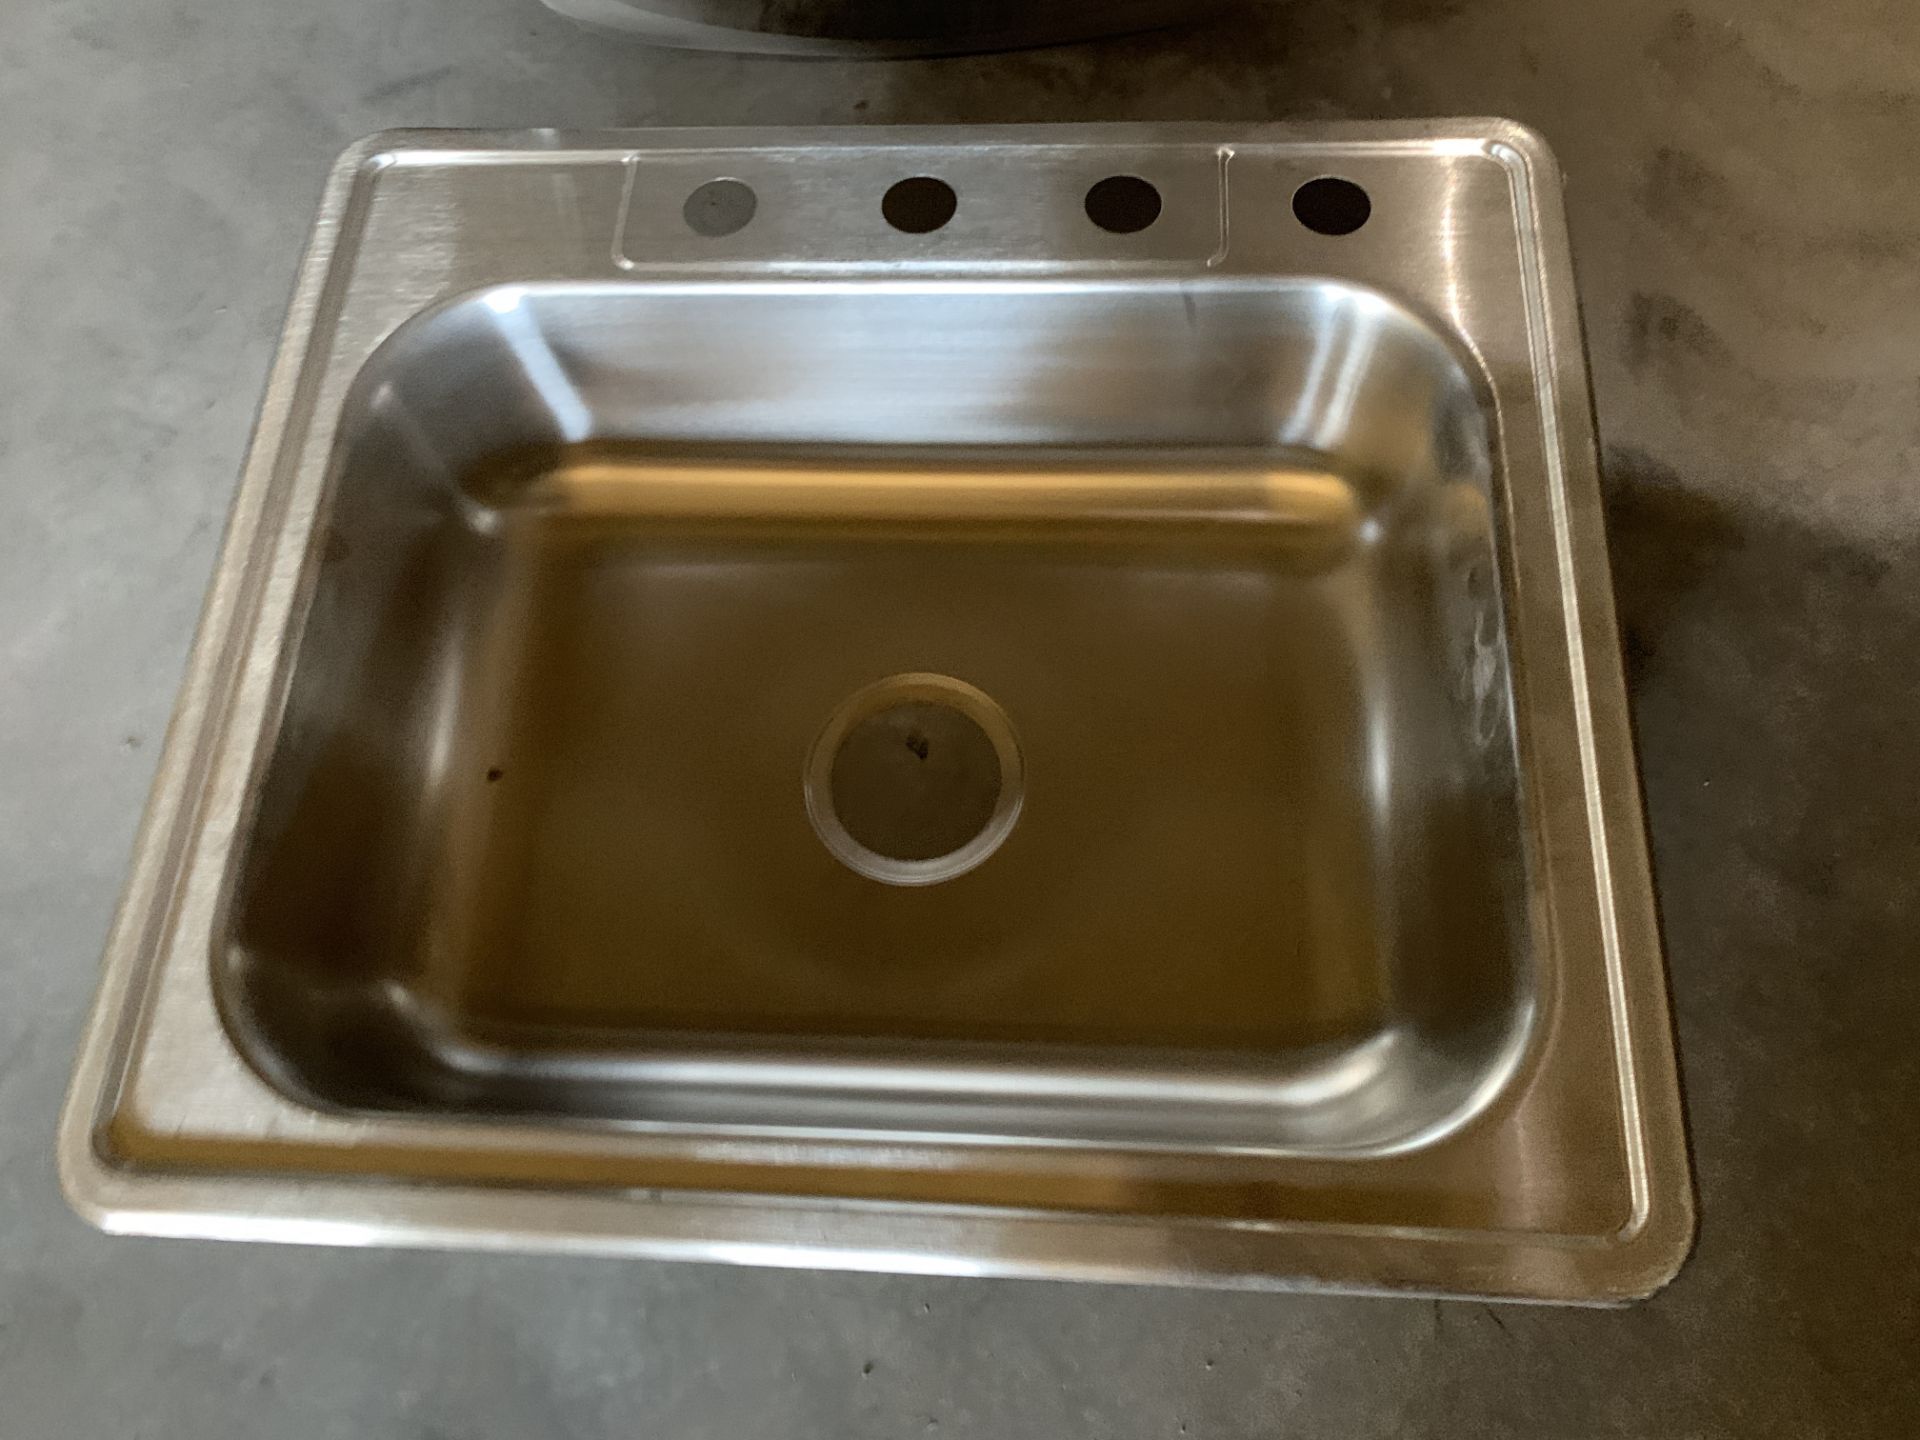 2x Lowes Stainless Steel Kitchen Sinks, New - Image 2 of 4